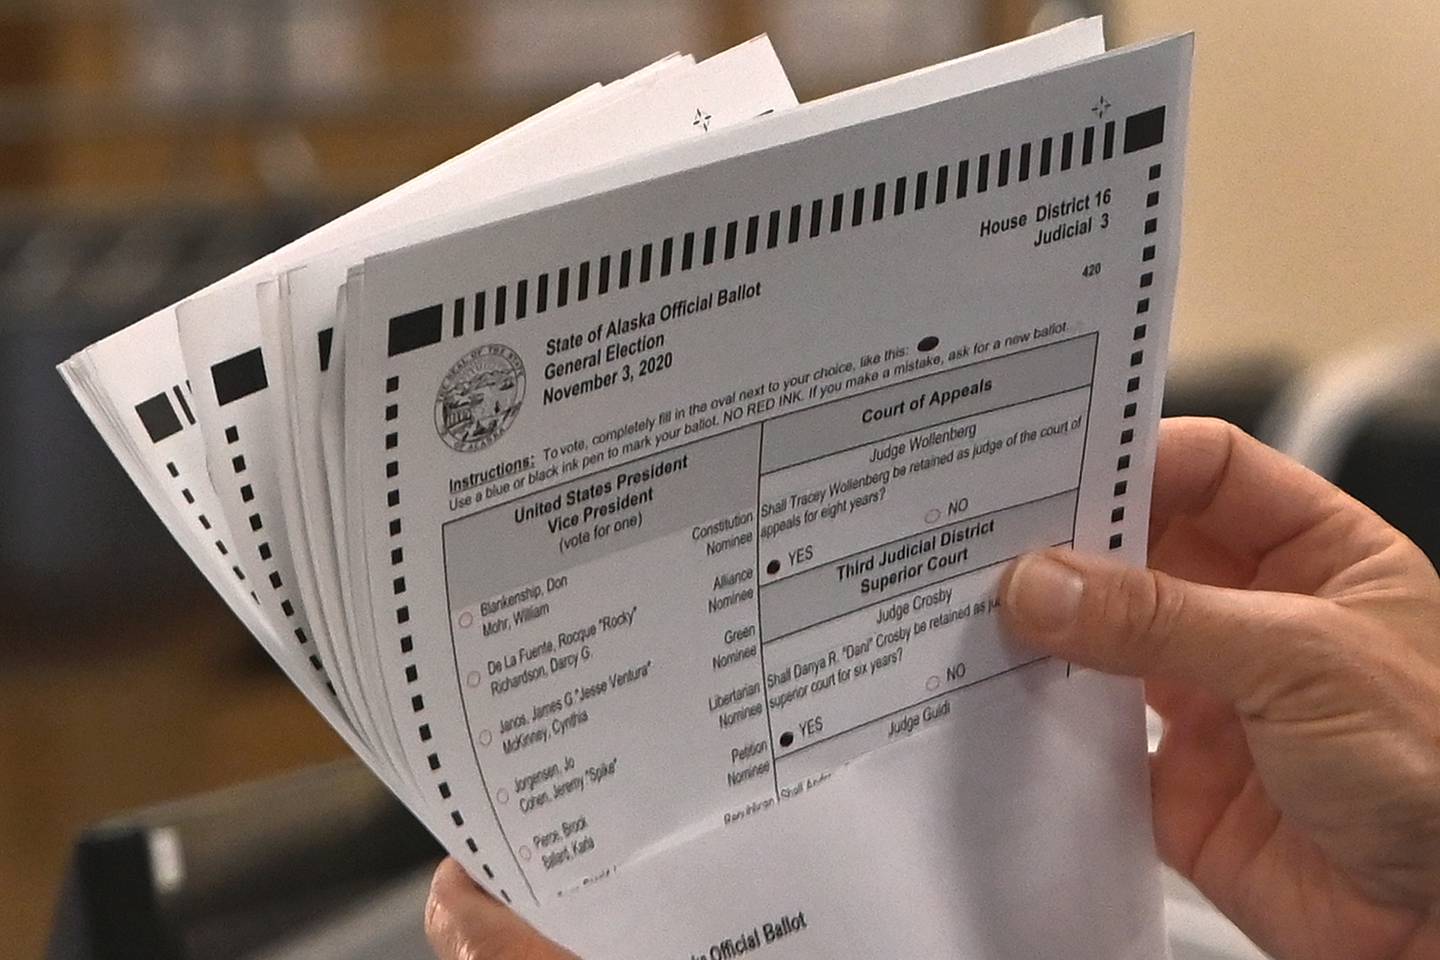 Election, absentee partial counts 